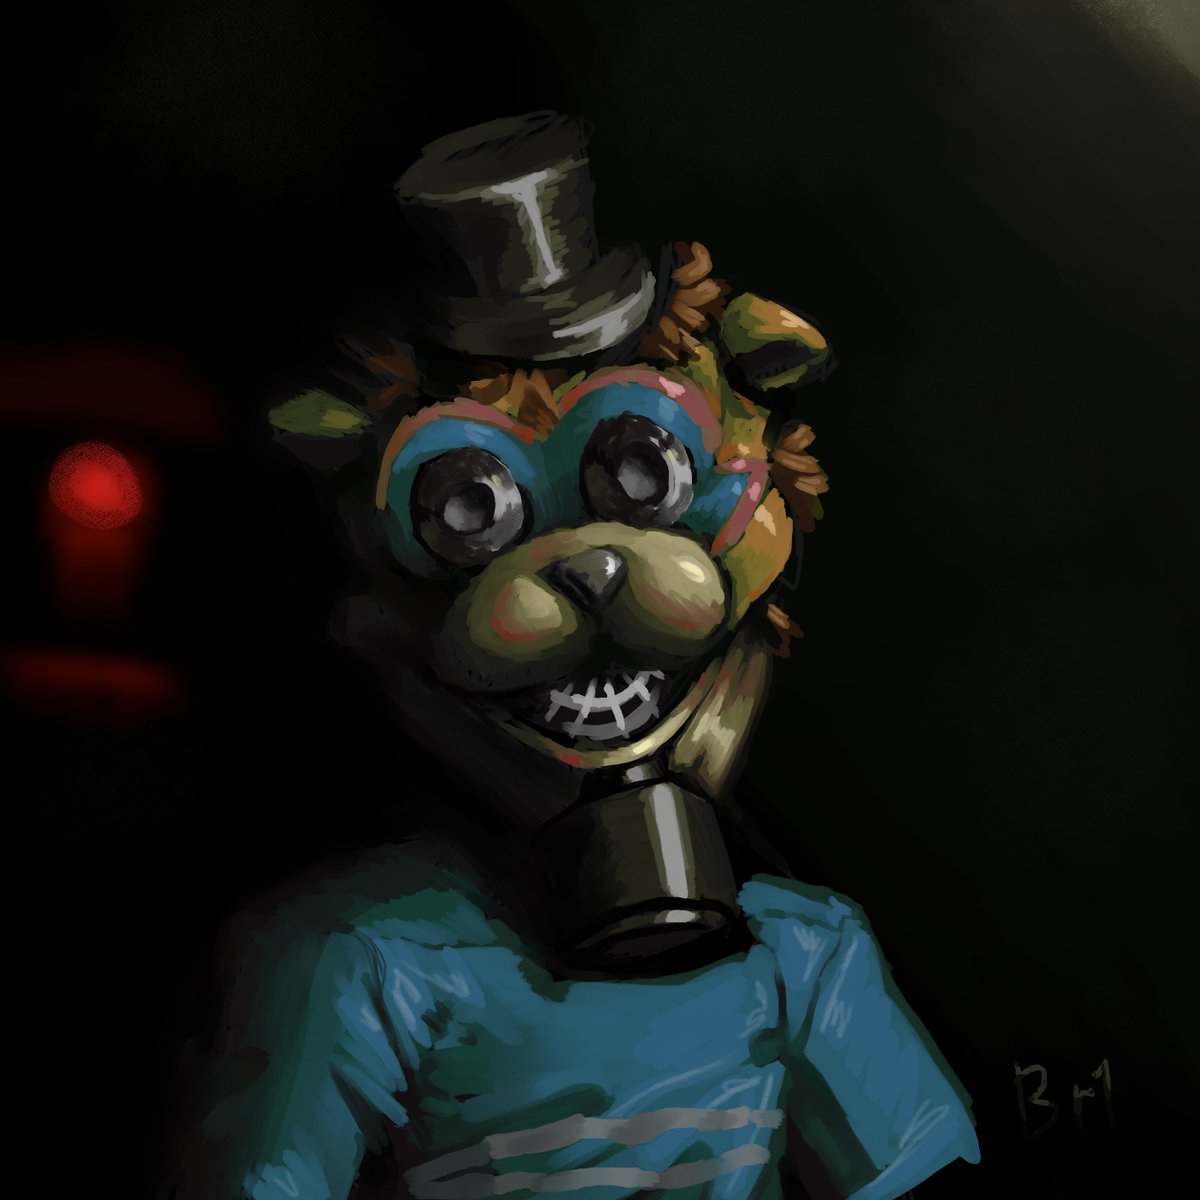 Reply to @grimes_101 Here you go! #fnaf #witheredfreddy #fnafart #dig